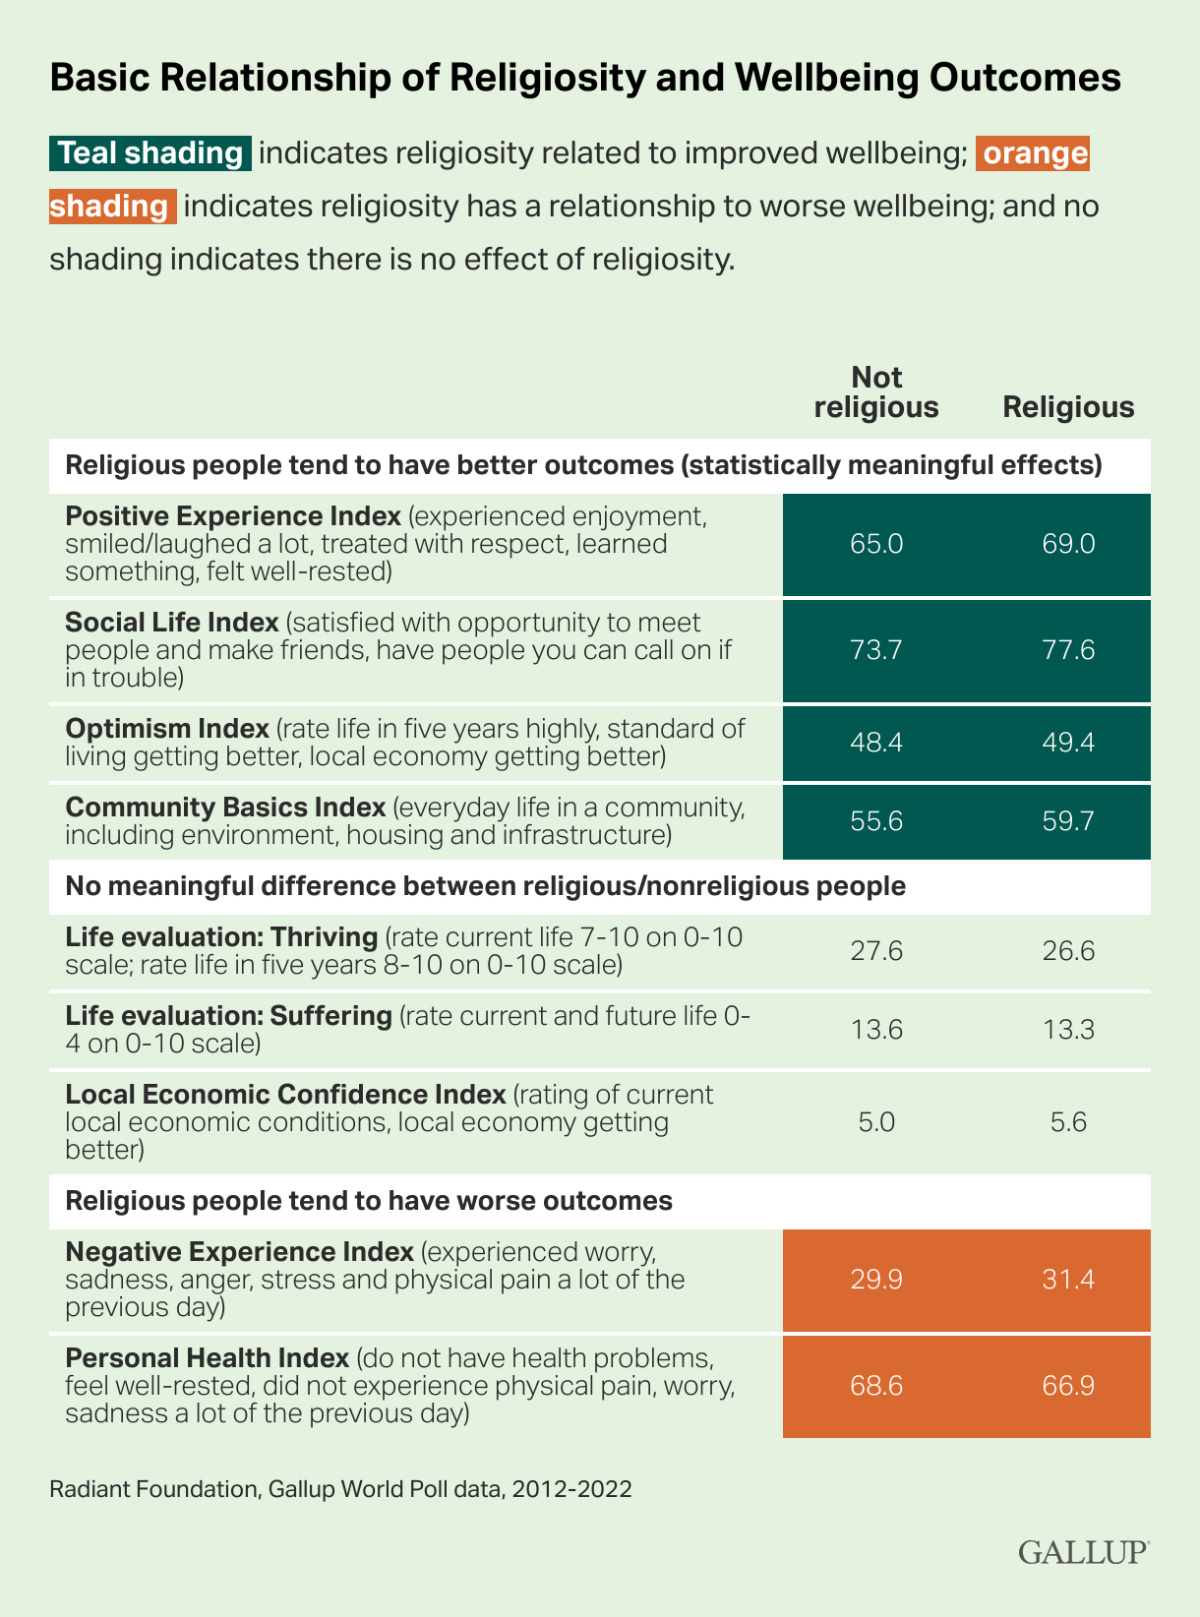 Graphic Gallup religiosity and wellbeing outcomes1